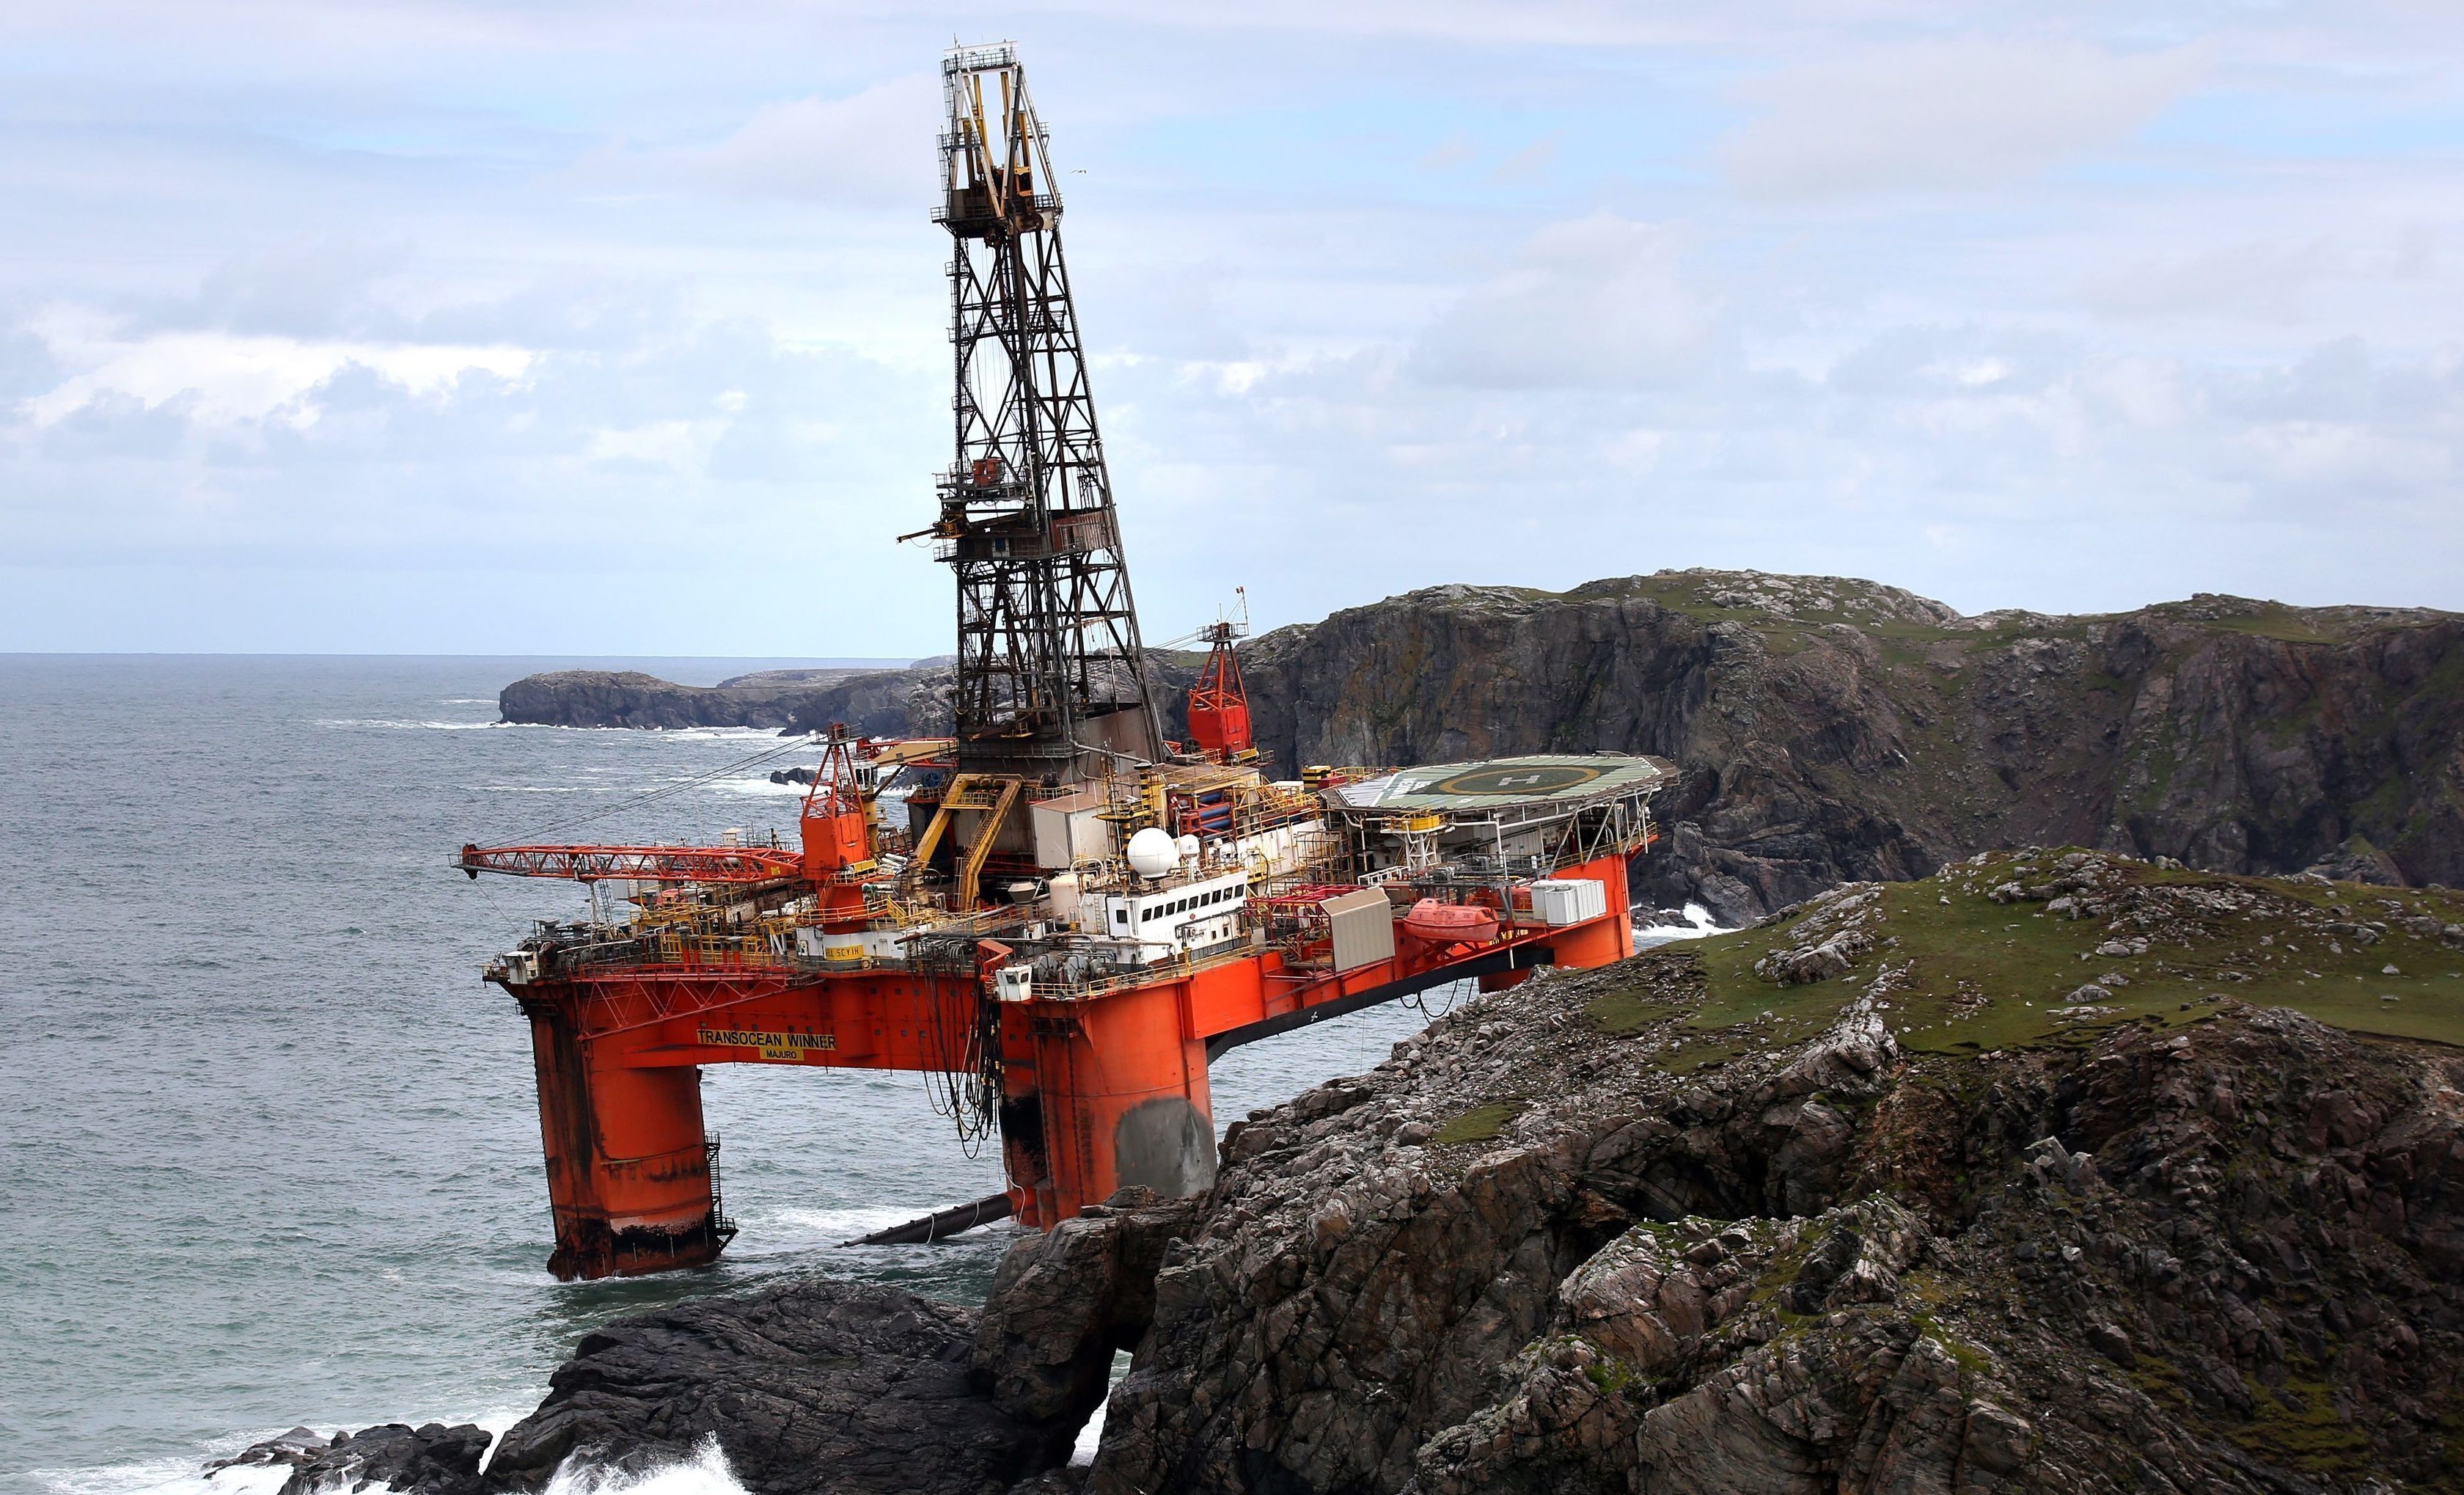 The Transocean Winner drilling rig after it ran aground on the beach of Dalmore in the Carloway area of the Isle of Lewis.